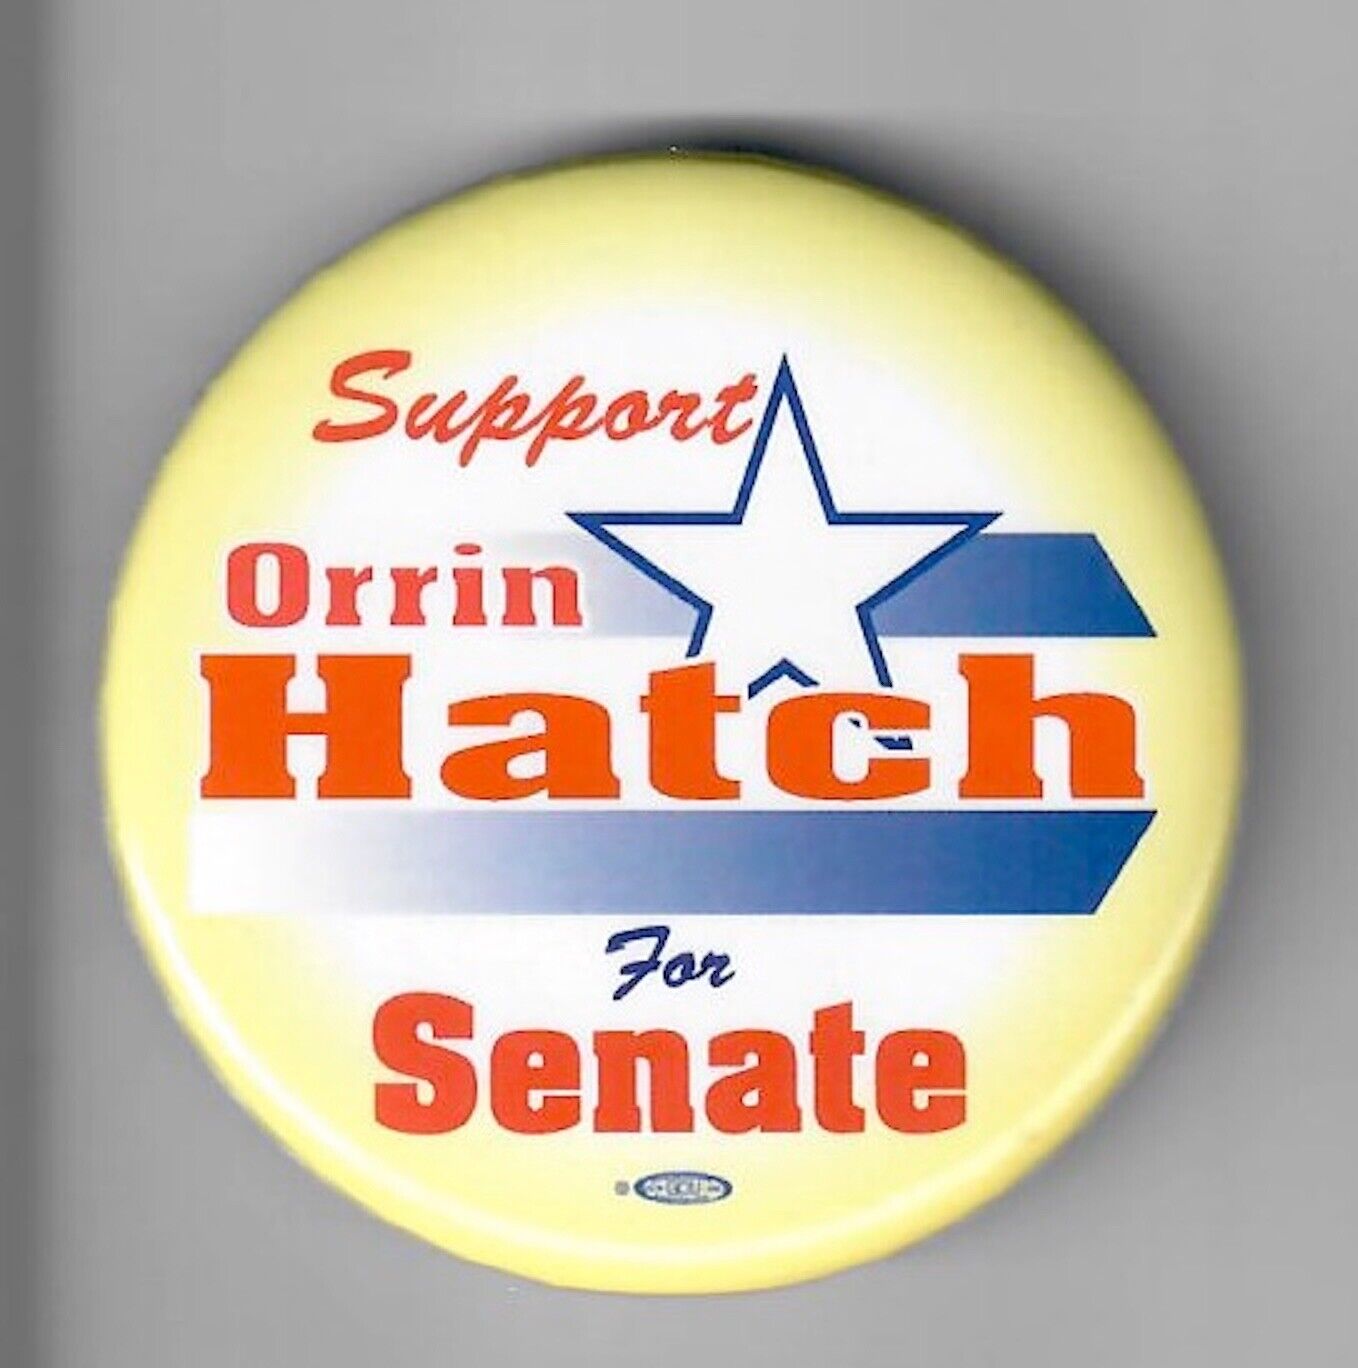 Orrin Hatch for Utah Senate 2006 Button--A Sample Button Sent to the Campaign